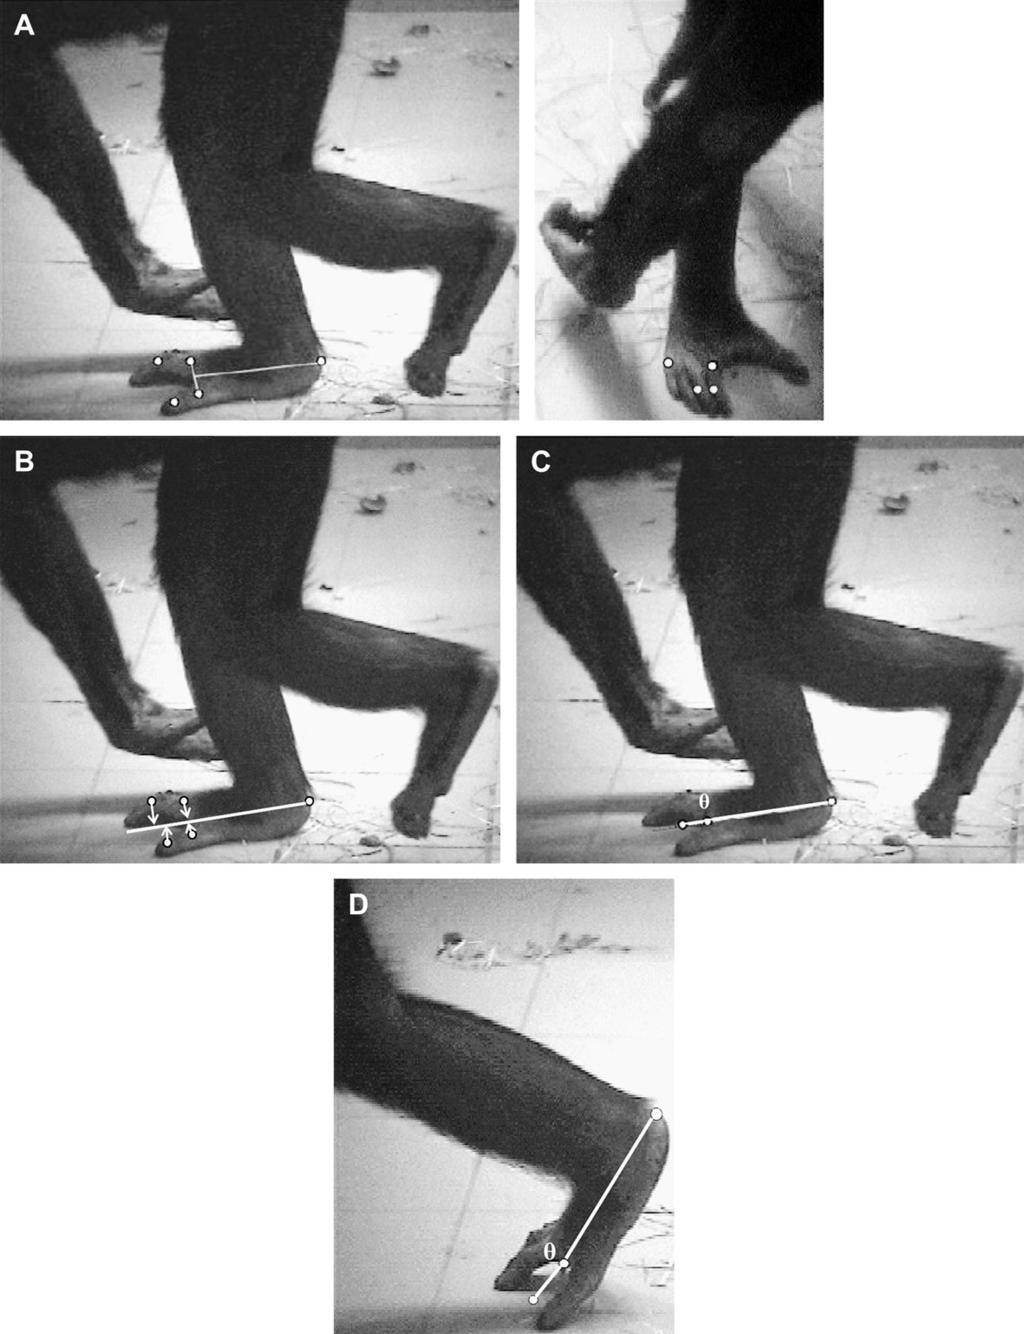 612 N.L. Griffin et al. / Journal of Human Evolution 59 (2010) 608e619 Figure 2. Direction of locomotion and foot posture of bonobo subjects presented a challenge for measuring MTPJ dorsal excursion.